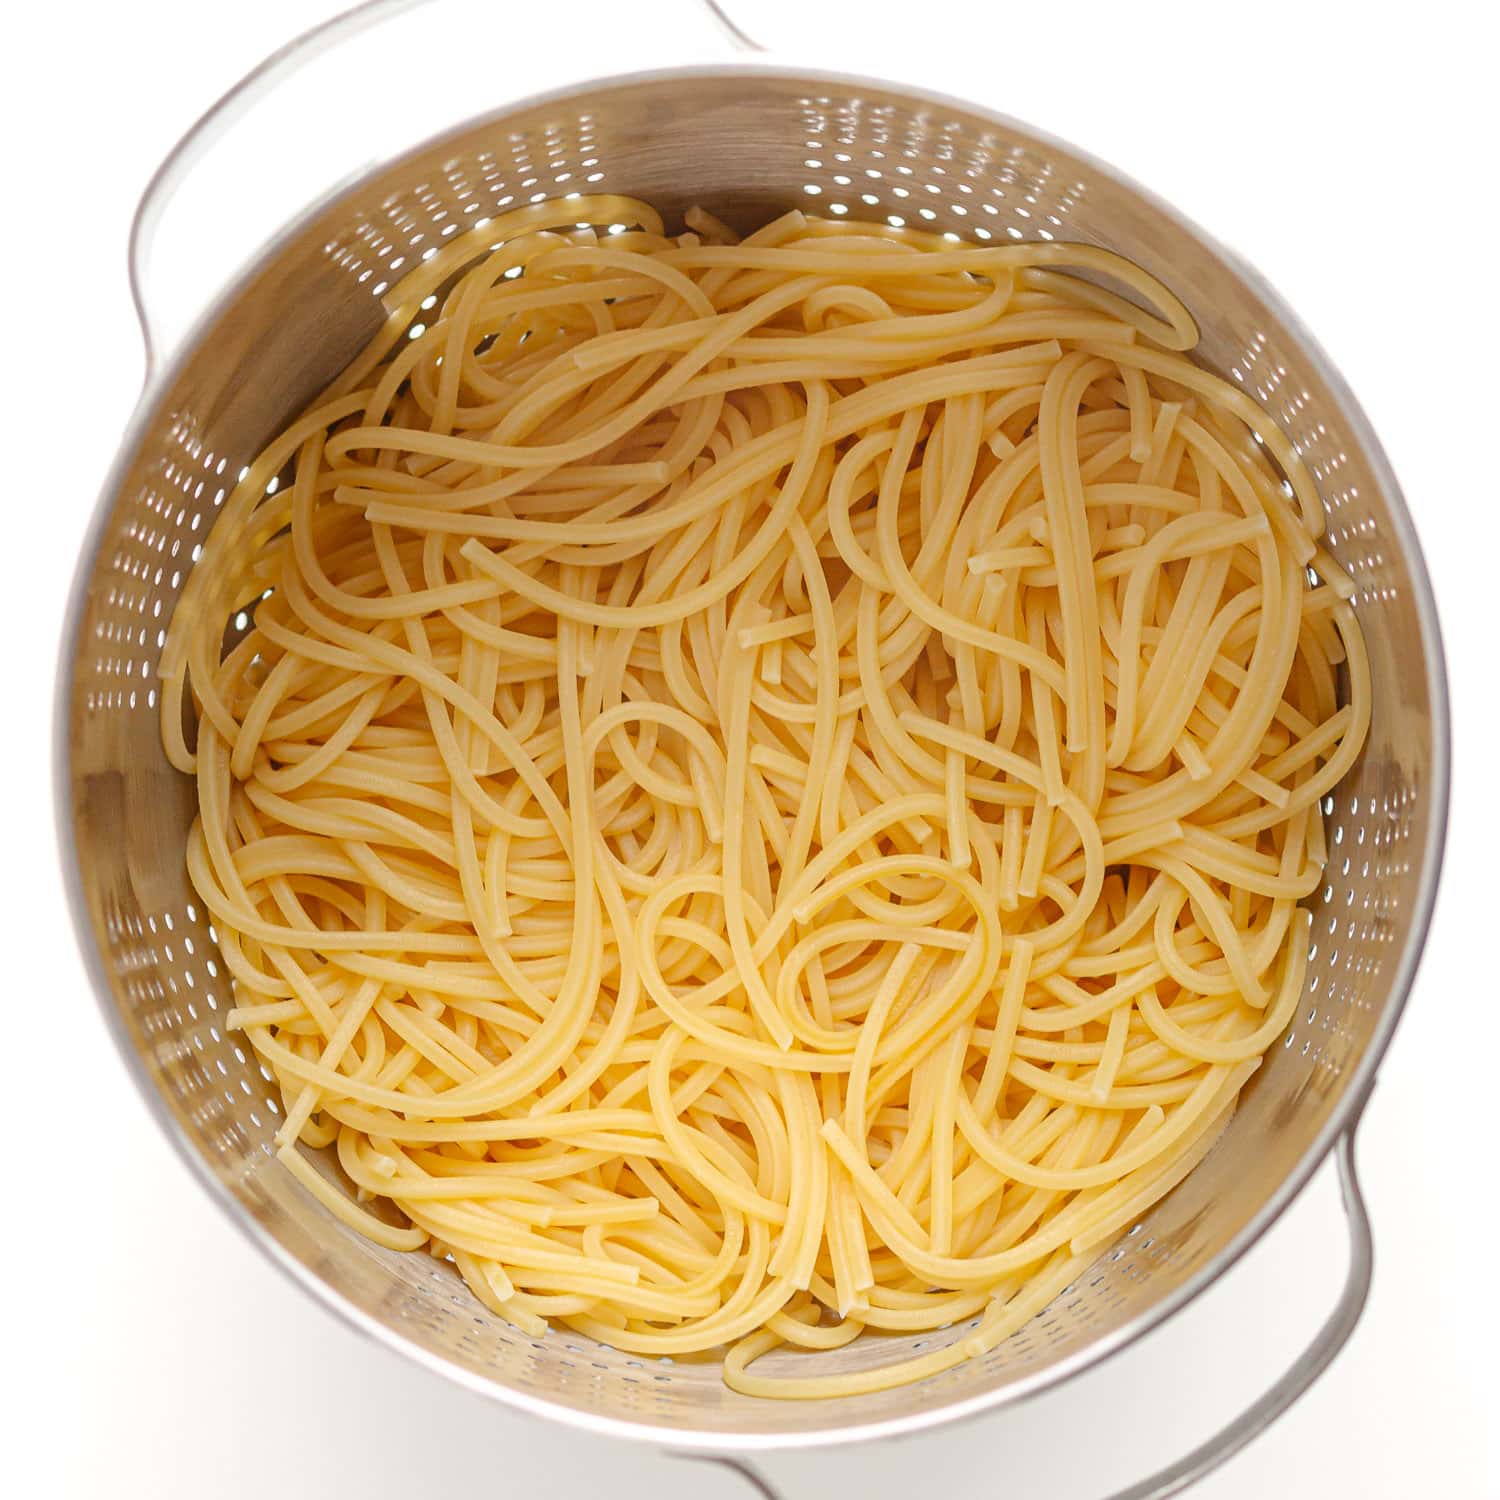 Cooked spaghetti in a stainless steel strainer.